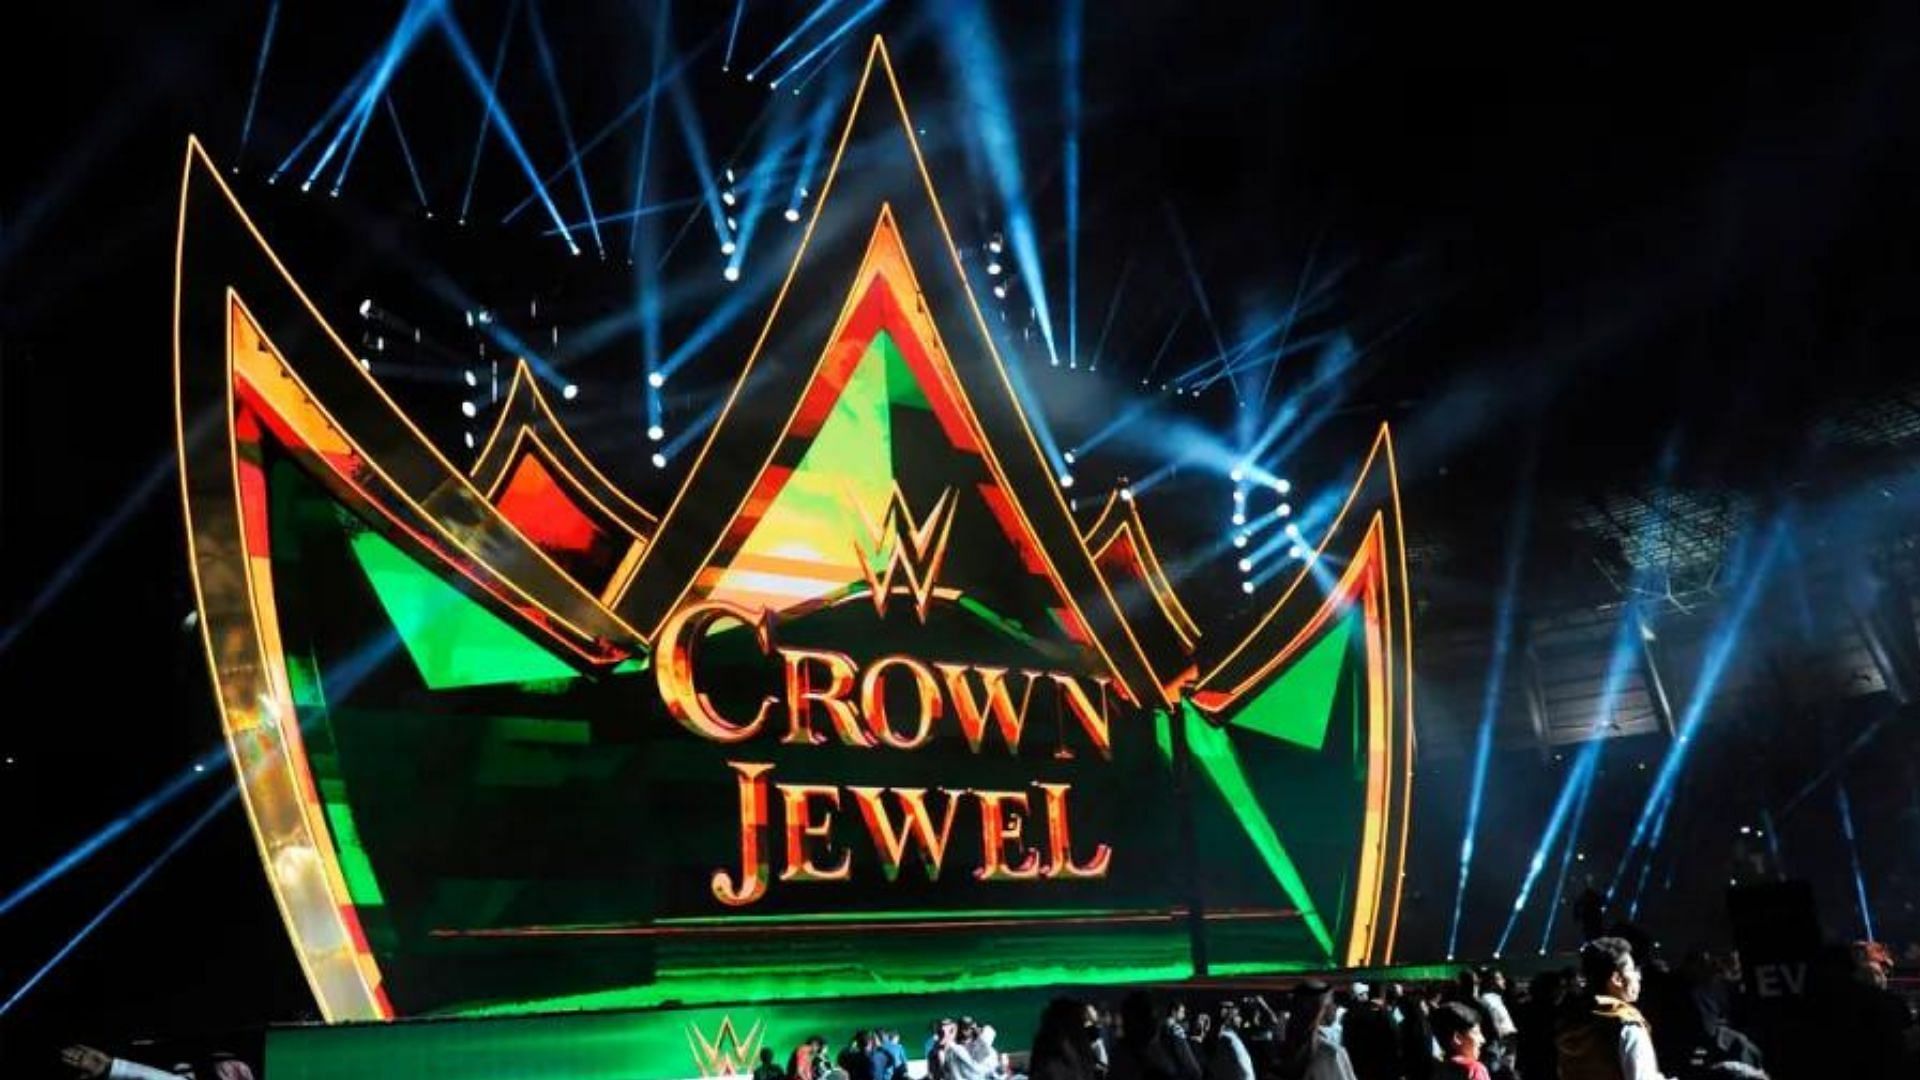 Crown Jewel will take place on November 4.